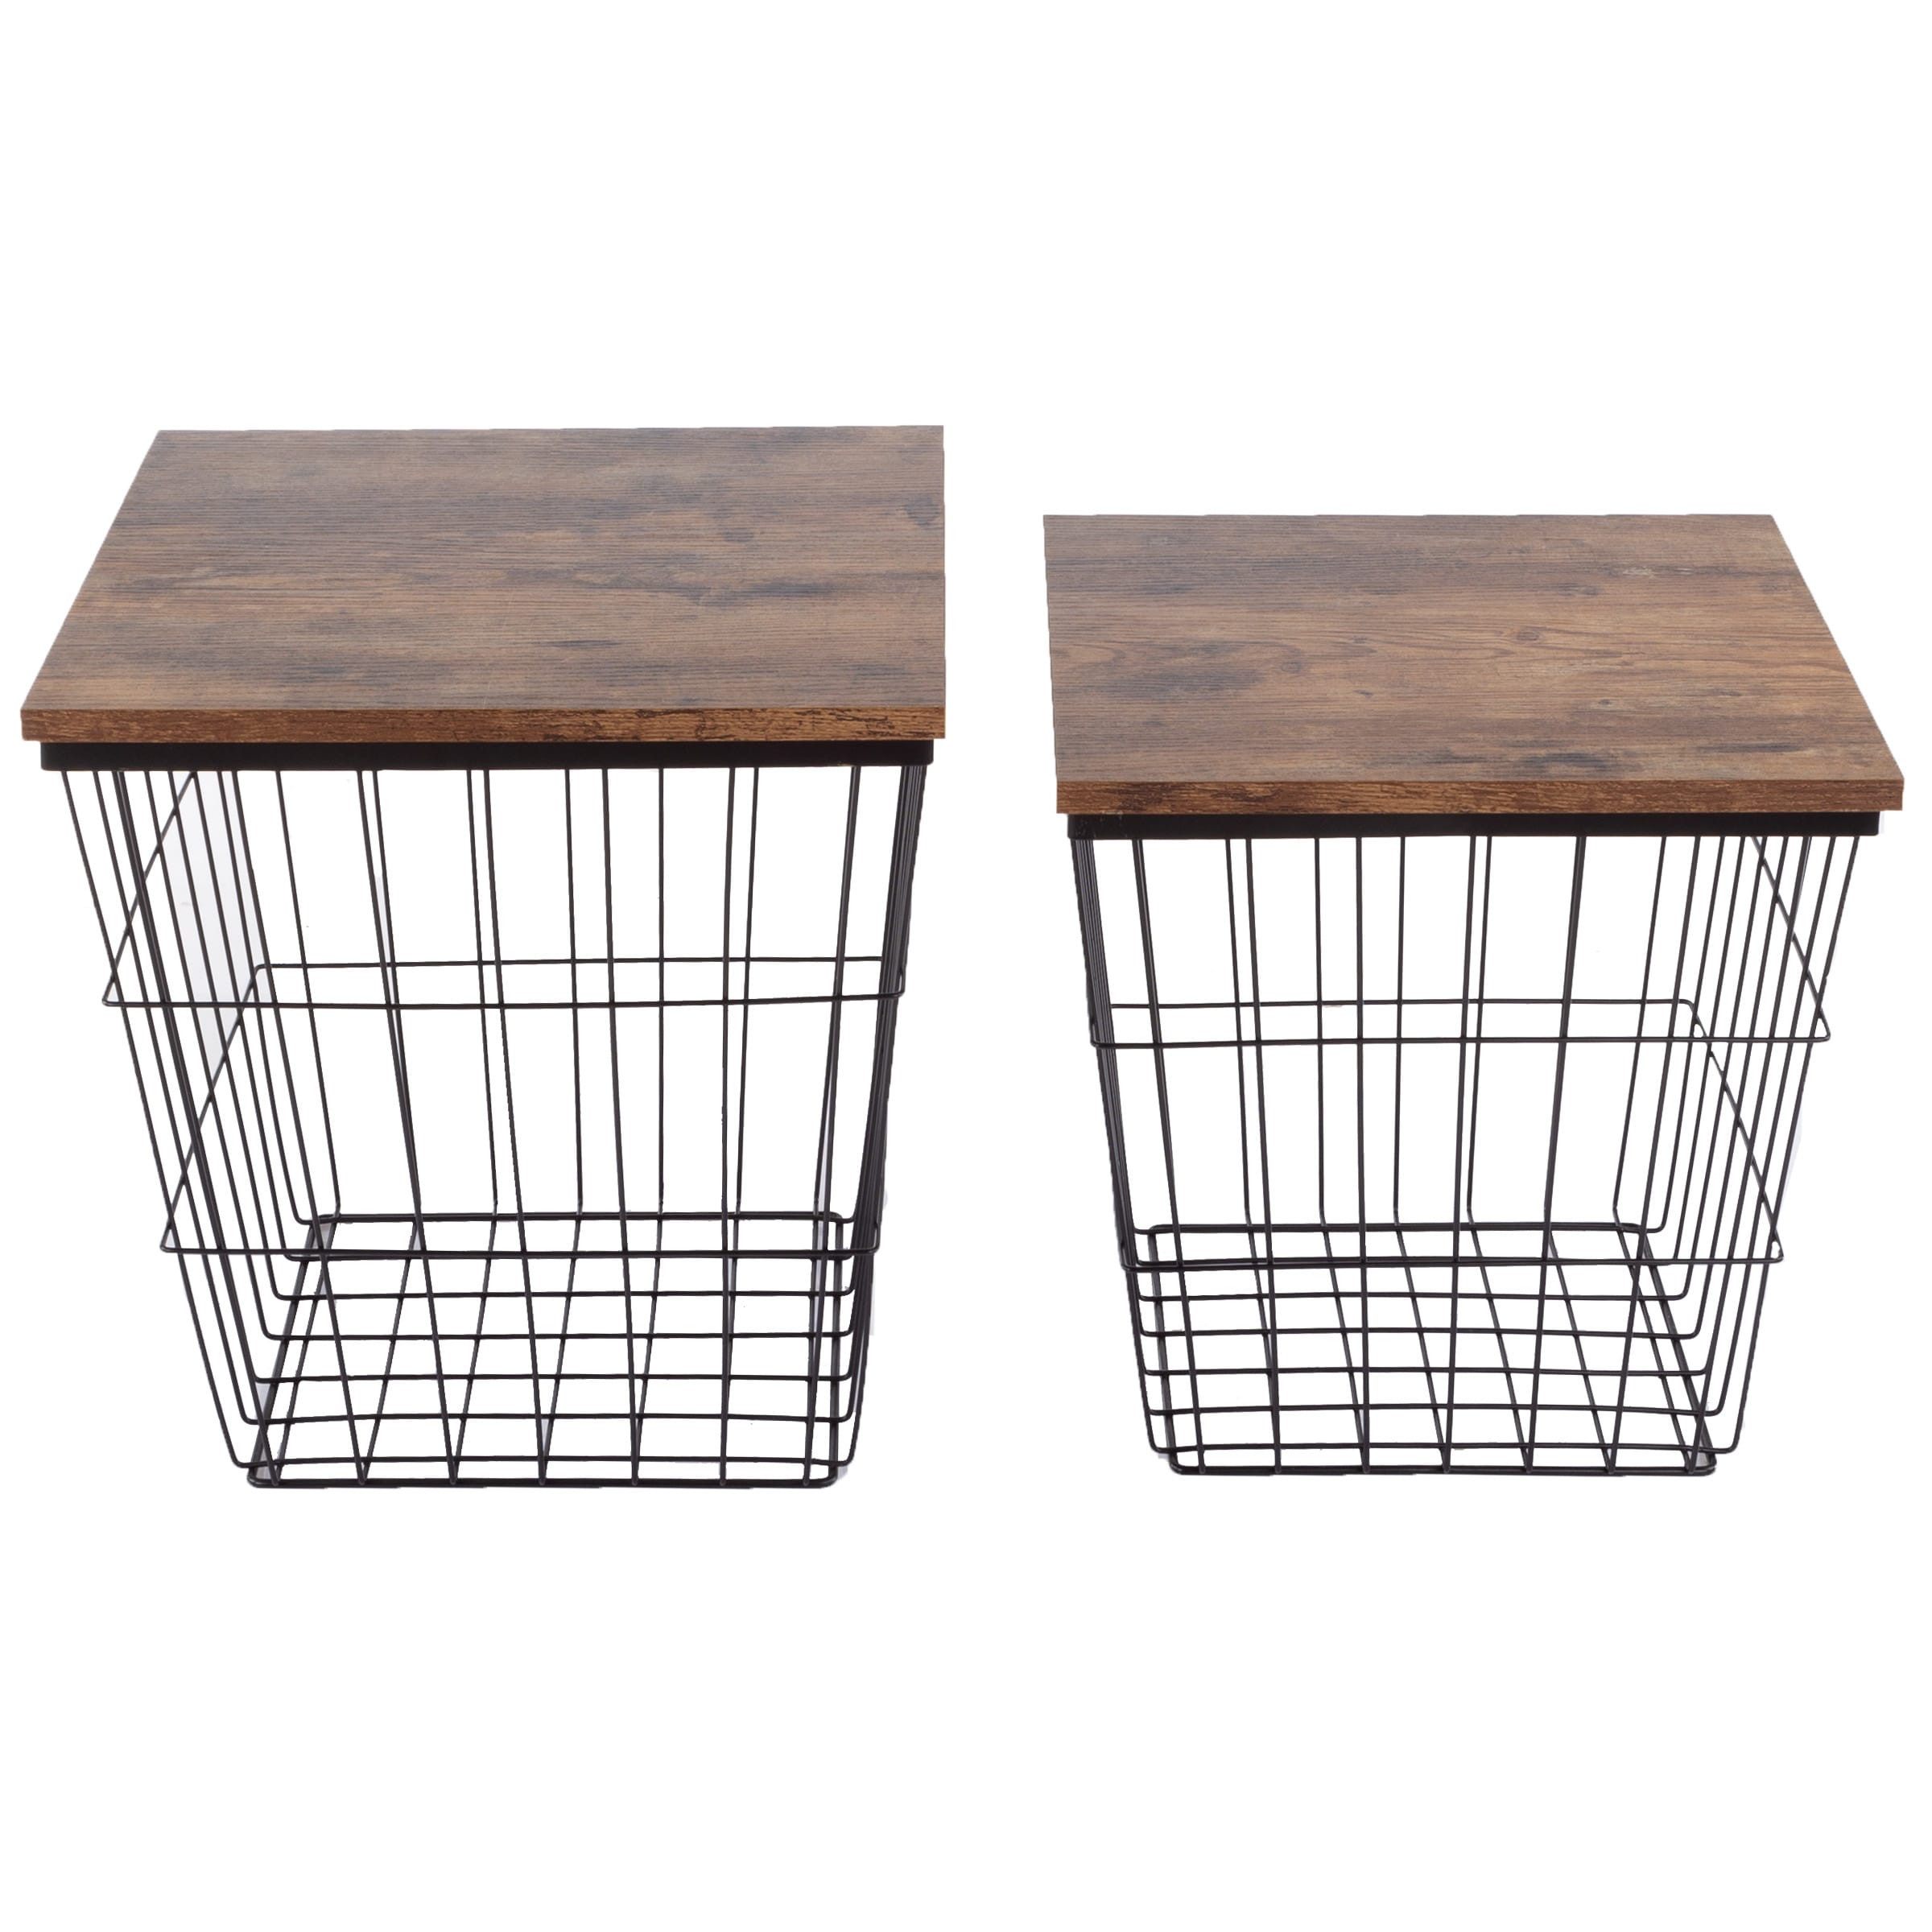 Lavish Home End Table Wire Basket Nesting Tables, Set of 2 - - 35935033